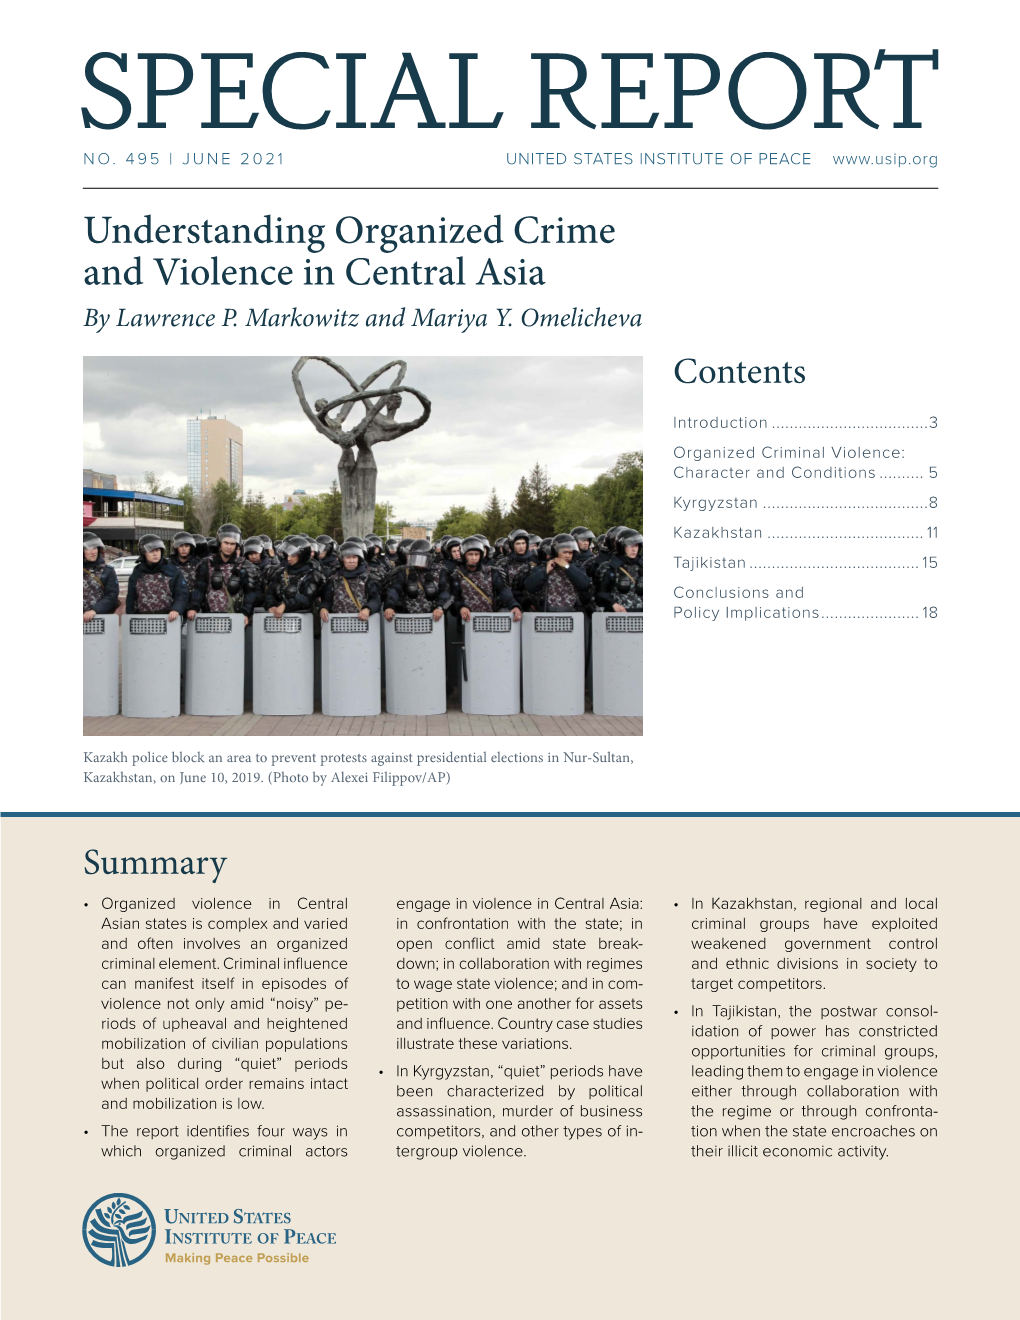 Understanding Organized Crime and Violence in Central Asia Special